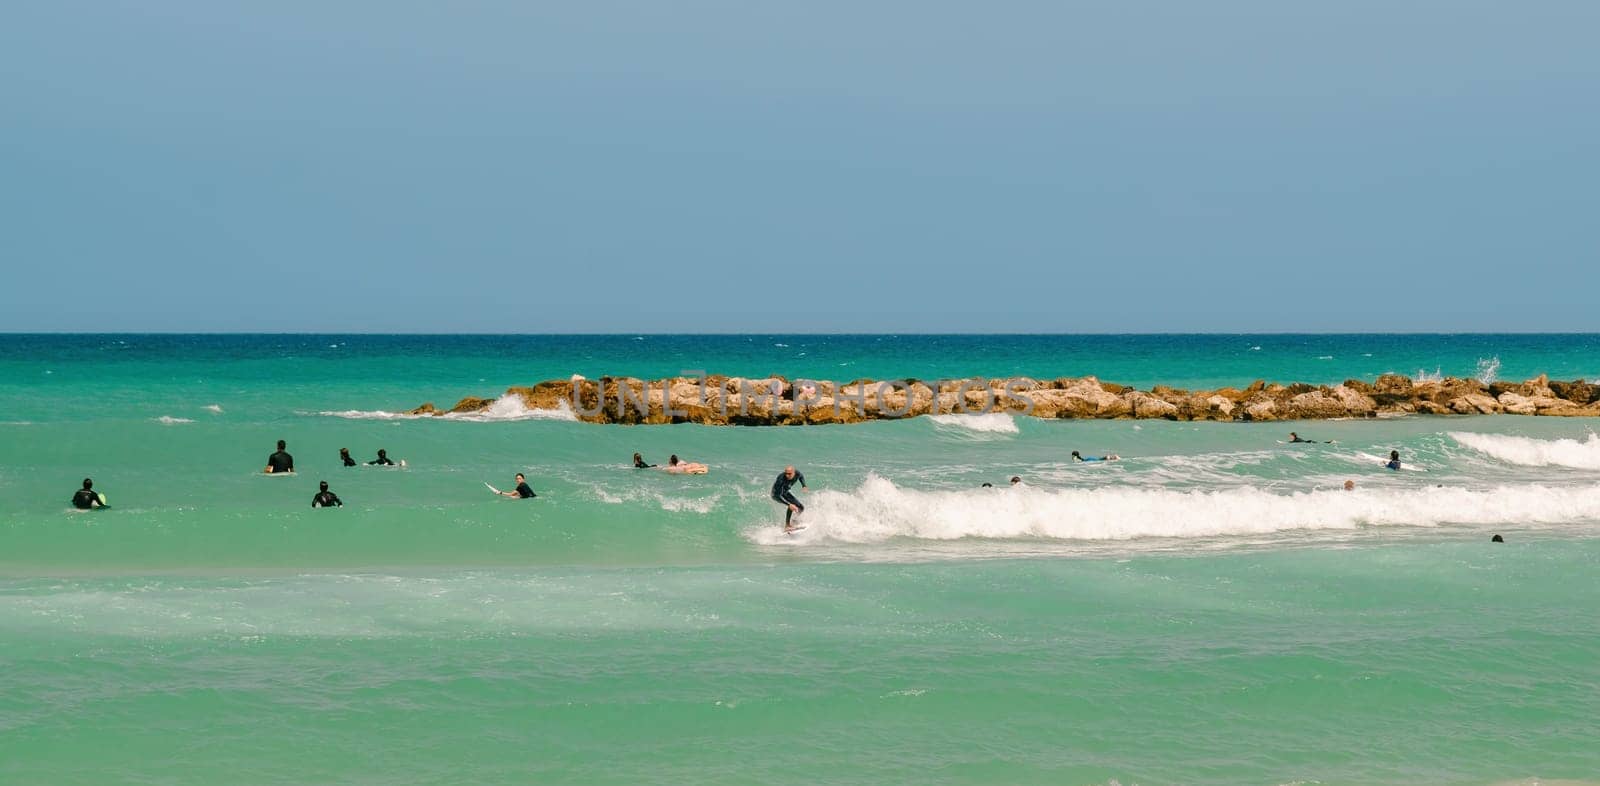 Surfing on a water board. A group of people surfers ride the waves in the ocean. Athletes in training with a coach learn to catch waves. Netanya, Israel. May 23, 2023 by Renisons